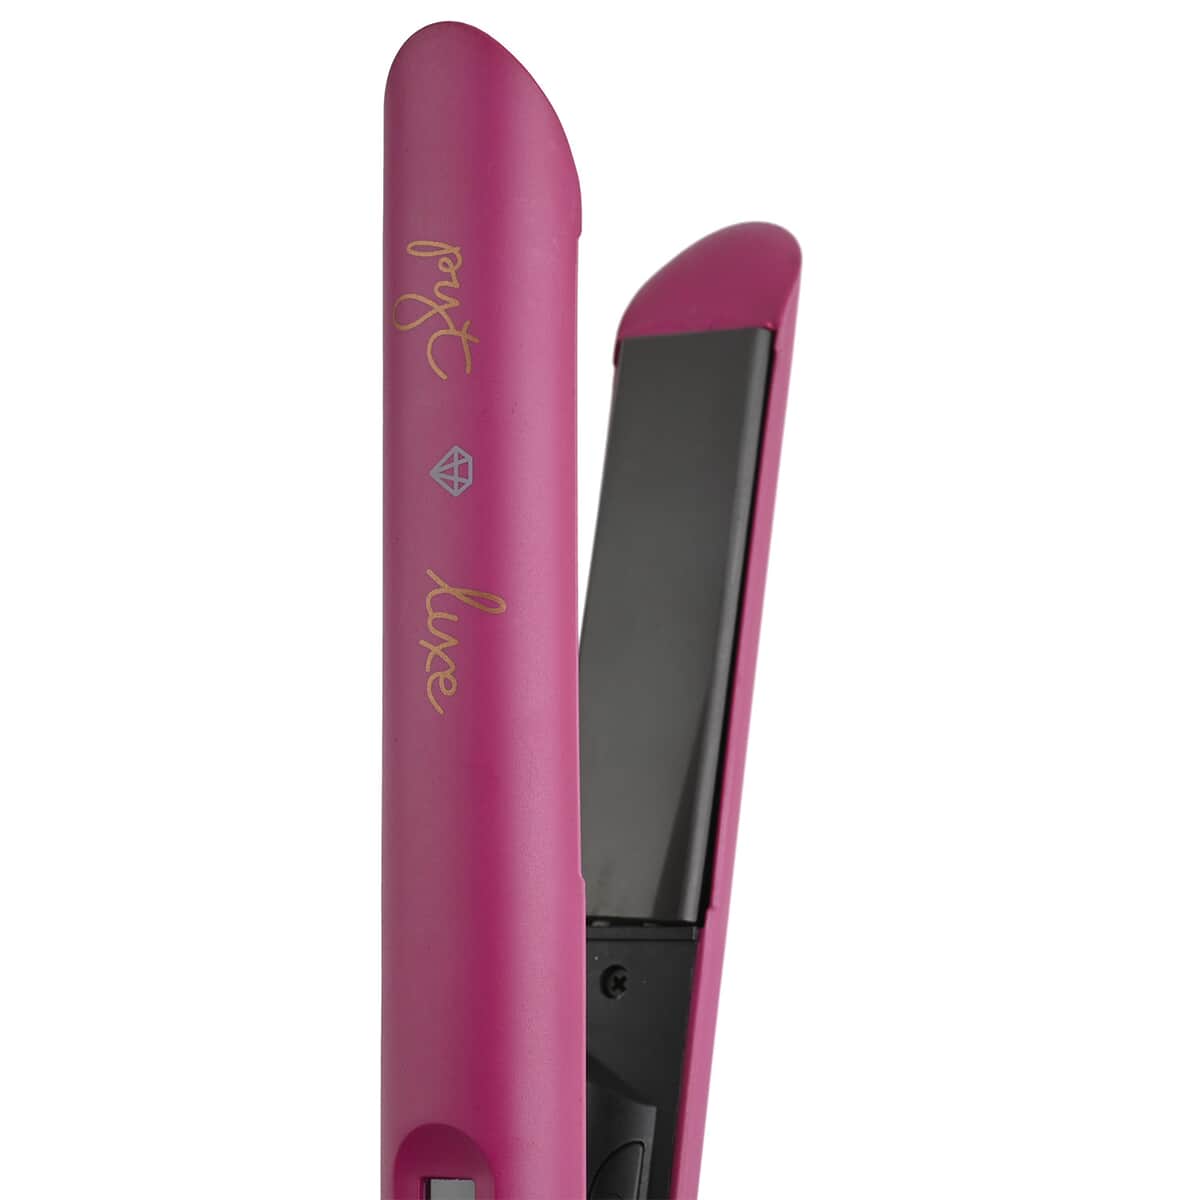 PYT HAIR 1 In Ion Fusion 2.0 Pro Digital Ceramic Styler - Purple Amethyst image number 6